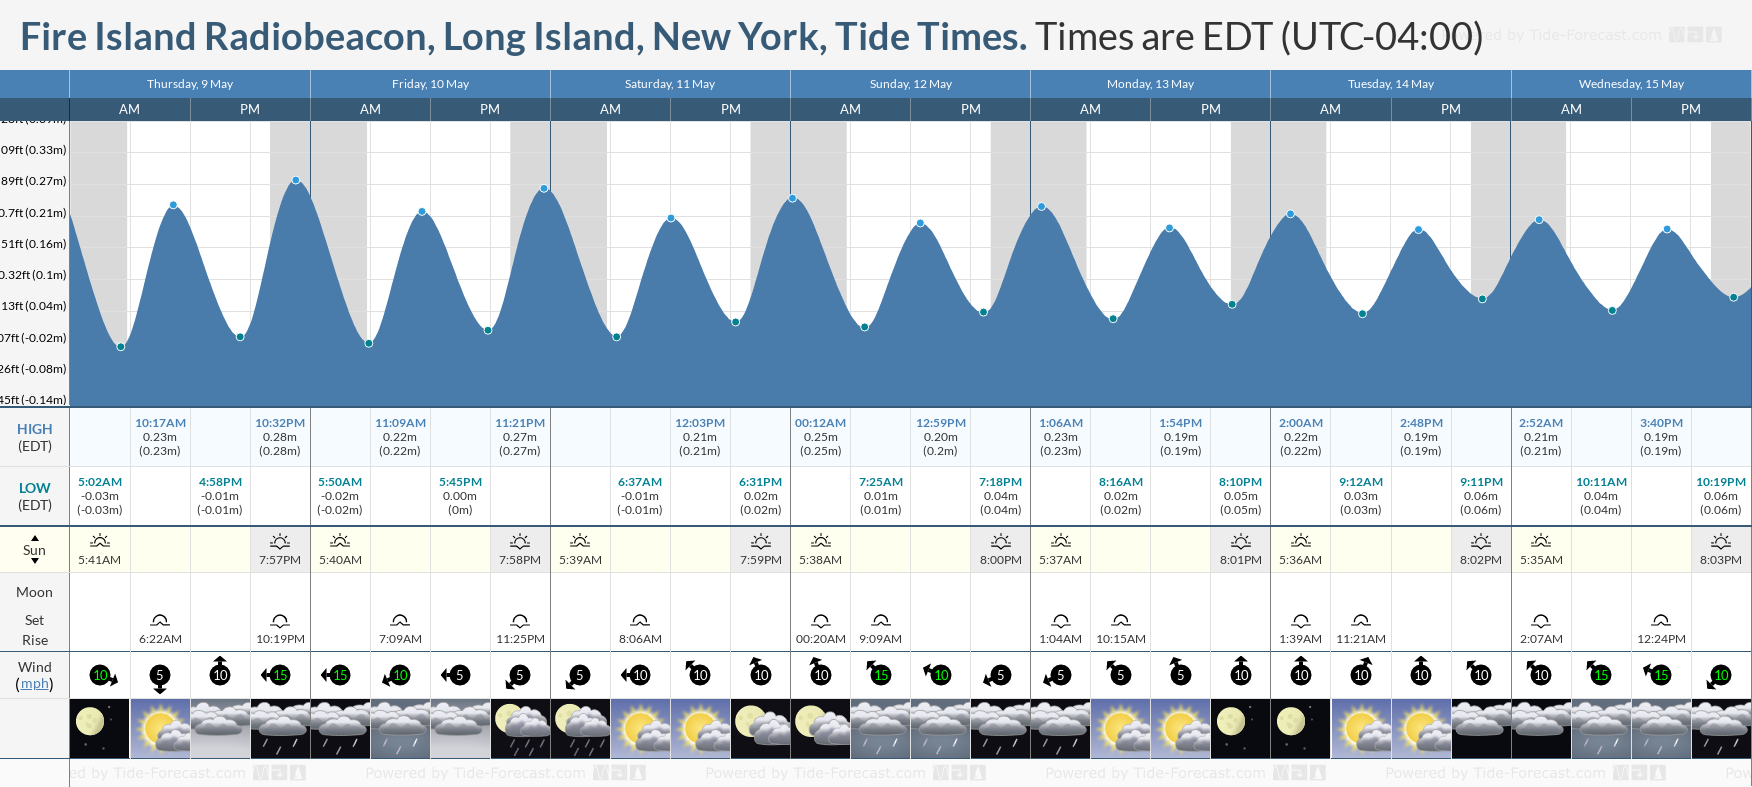 Fire Island Radiobeacon, Long Island, New York Tide Chart including high and low tide times for the next 7 days